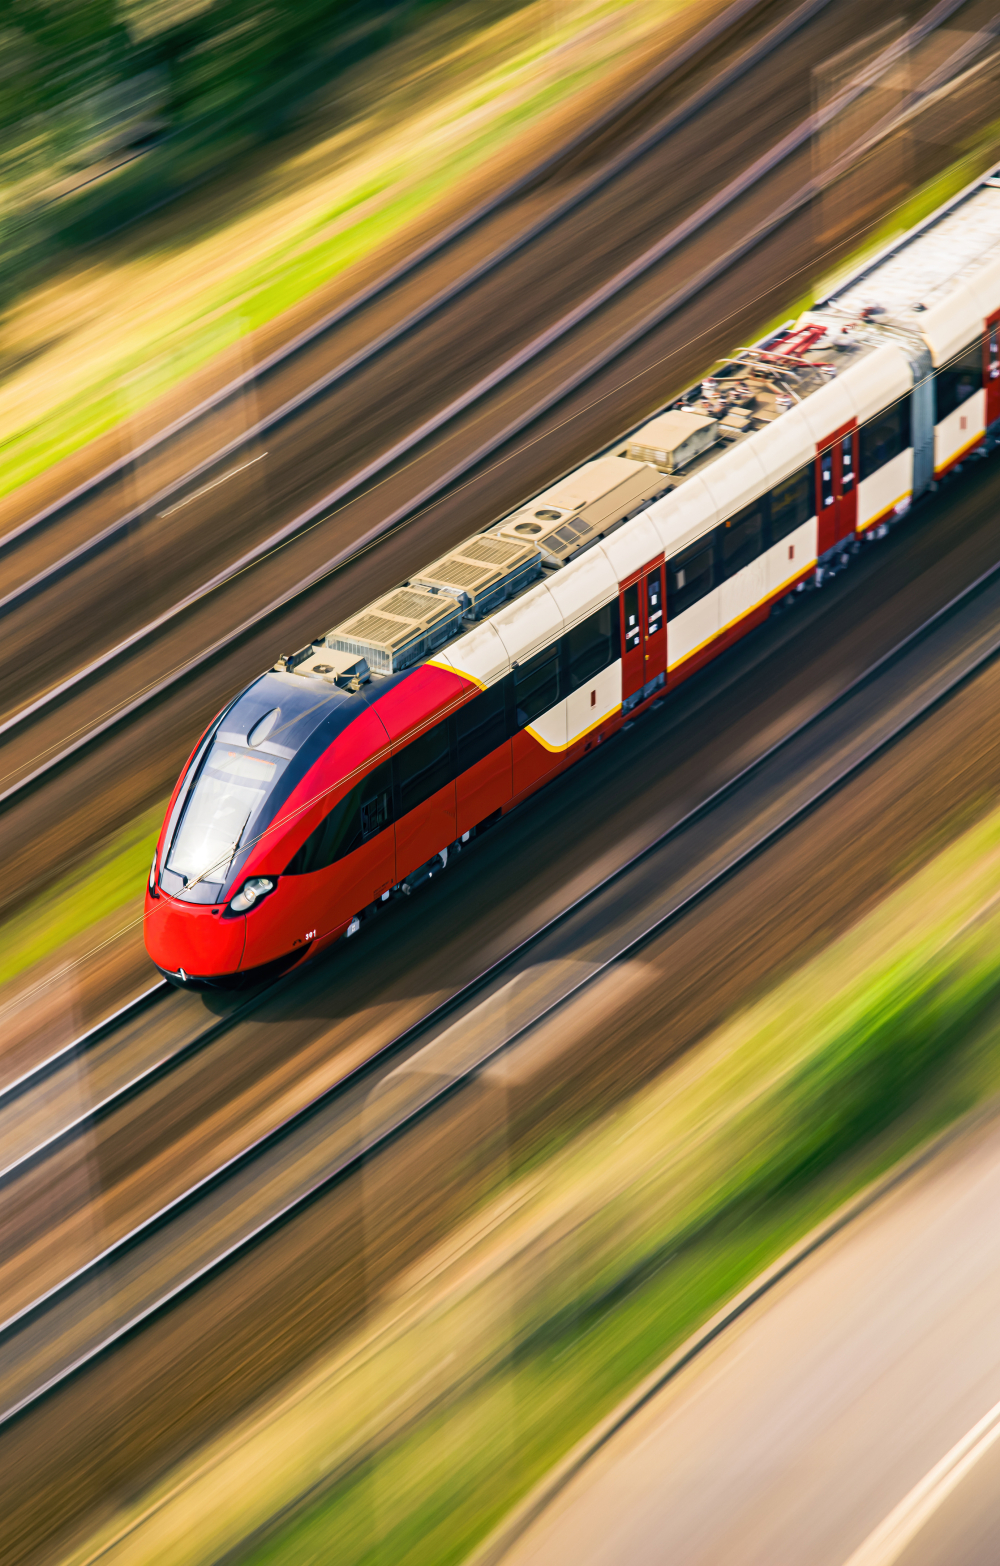 Fast red and white train entering town an aerial view